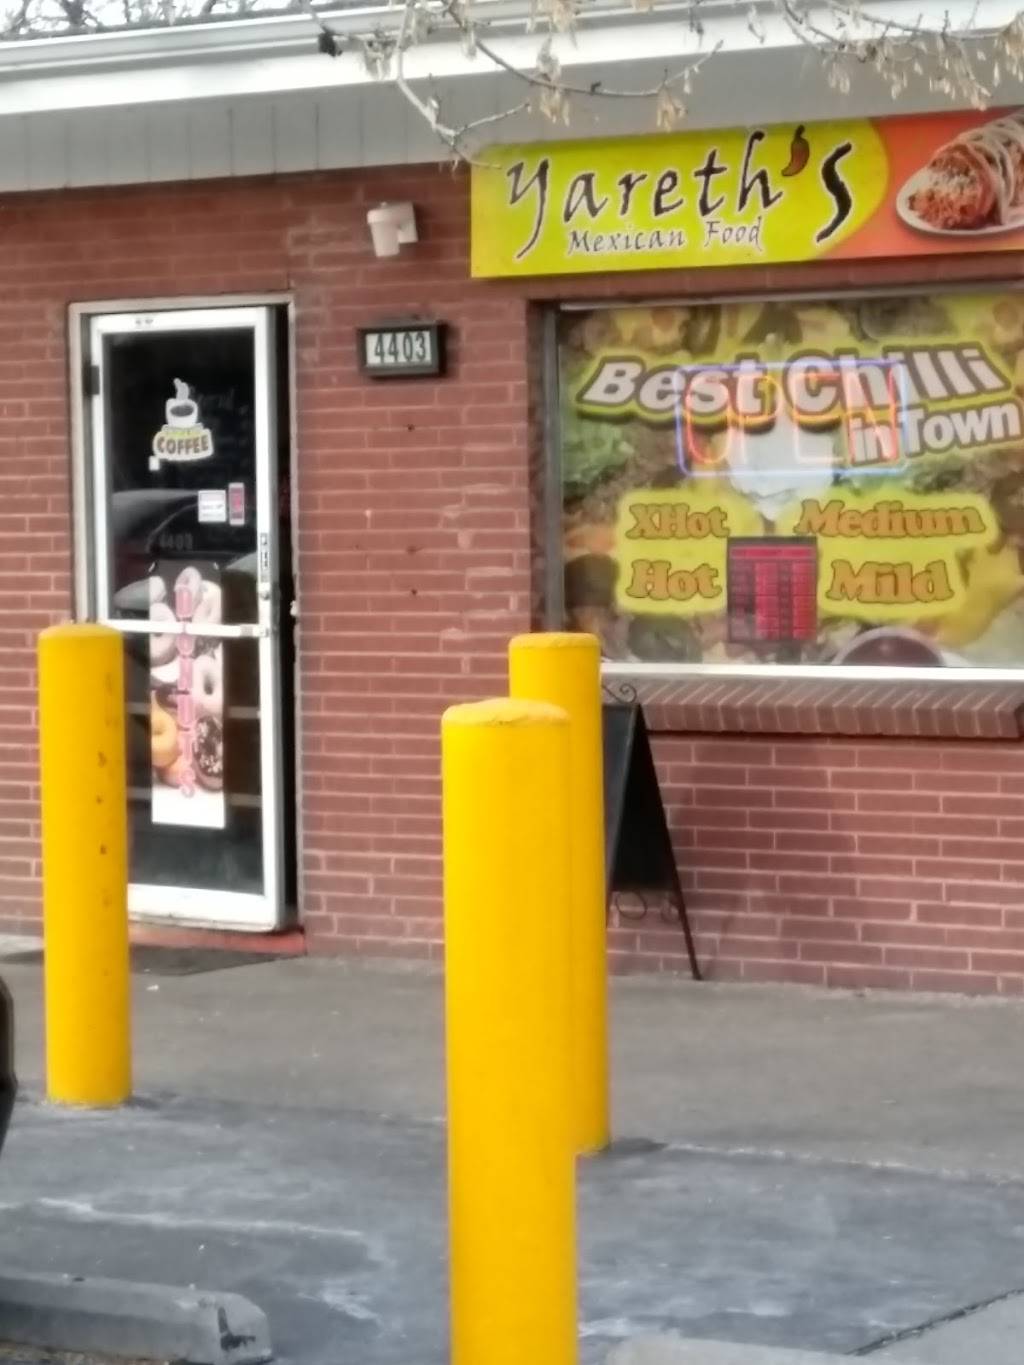 Yareths Mexican Fast Food | 4403 W 52nd Ave, Denver, CO 80212 | Phone: (303) 477-4102